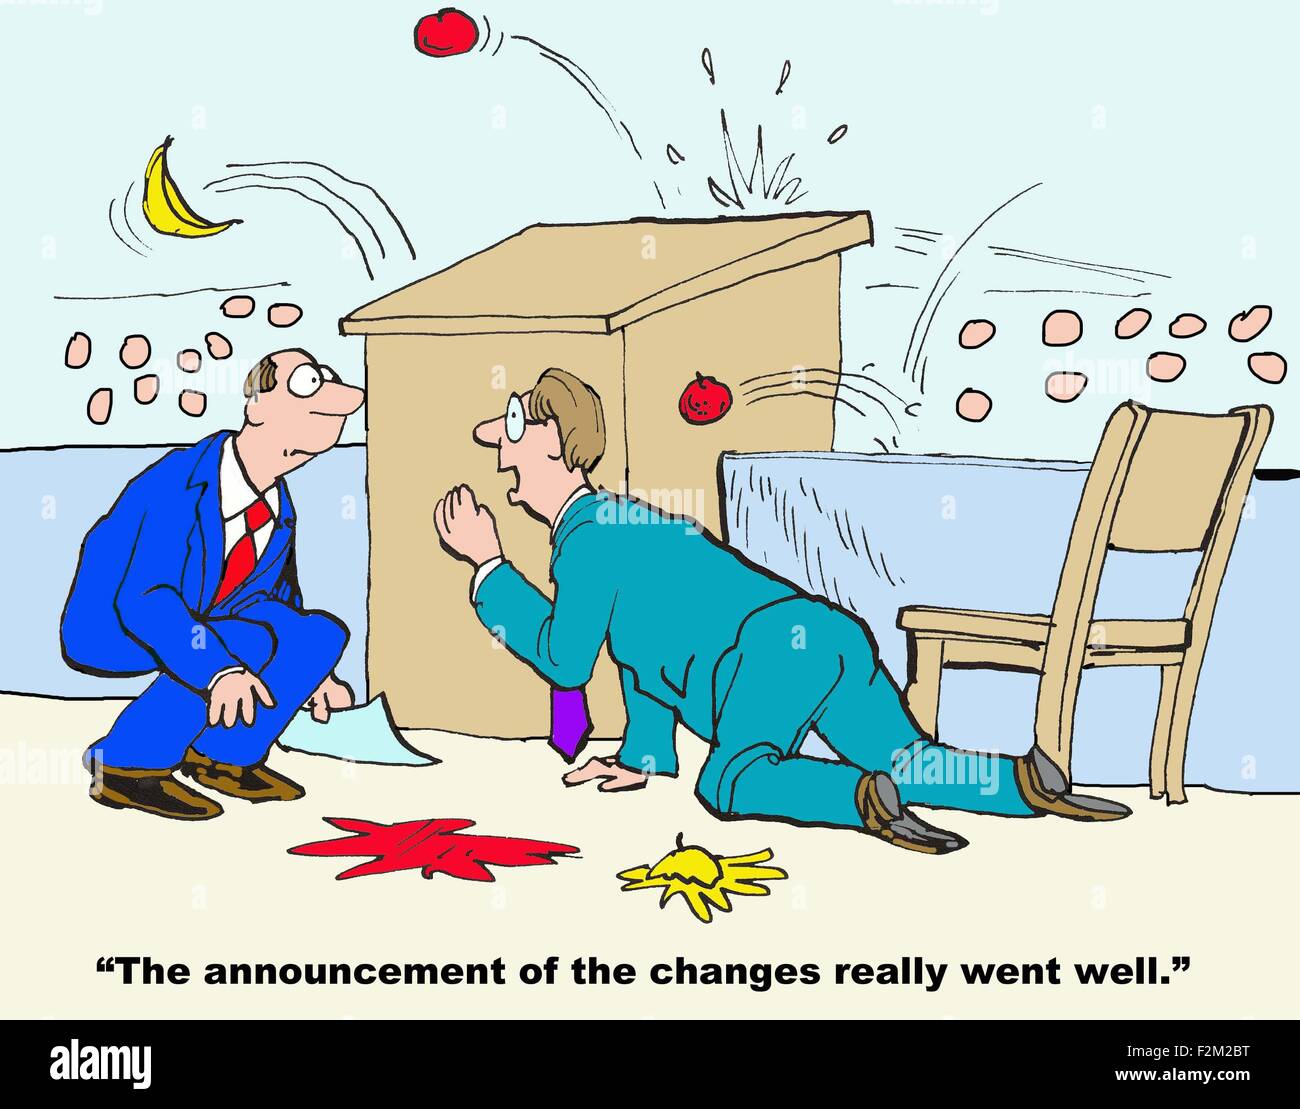 Business cartoon of two men behind podium with food being thrown at them, 'The announcement of the changes really went well'. Stock Photo